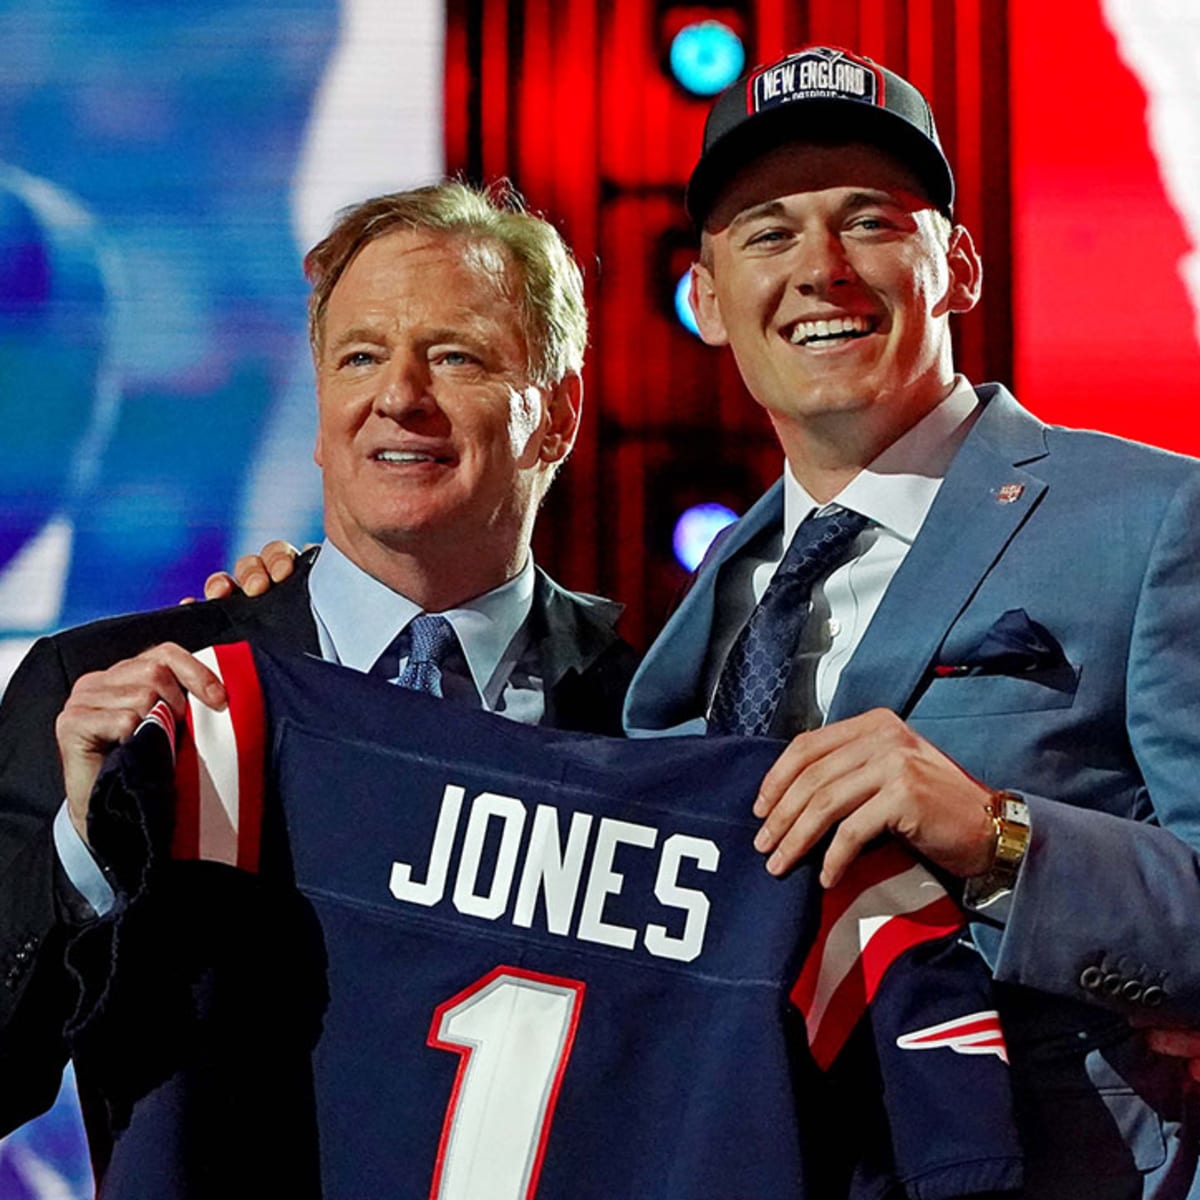 NFL Draft 2021: Day 2 news and rumors - Sports Illustrated